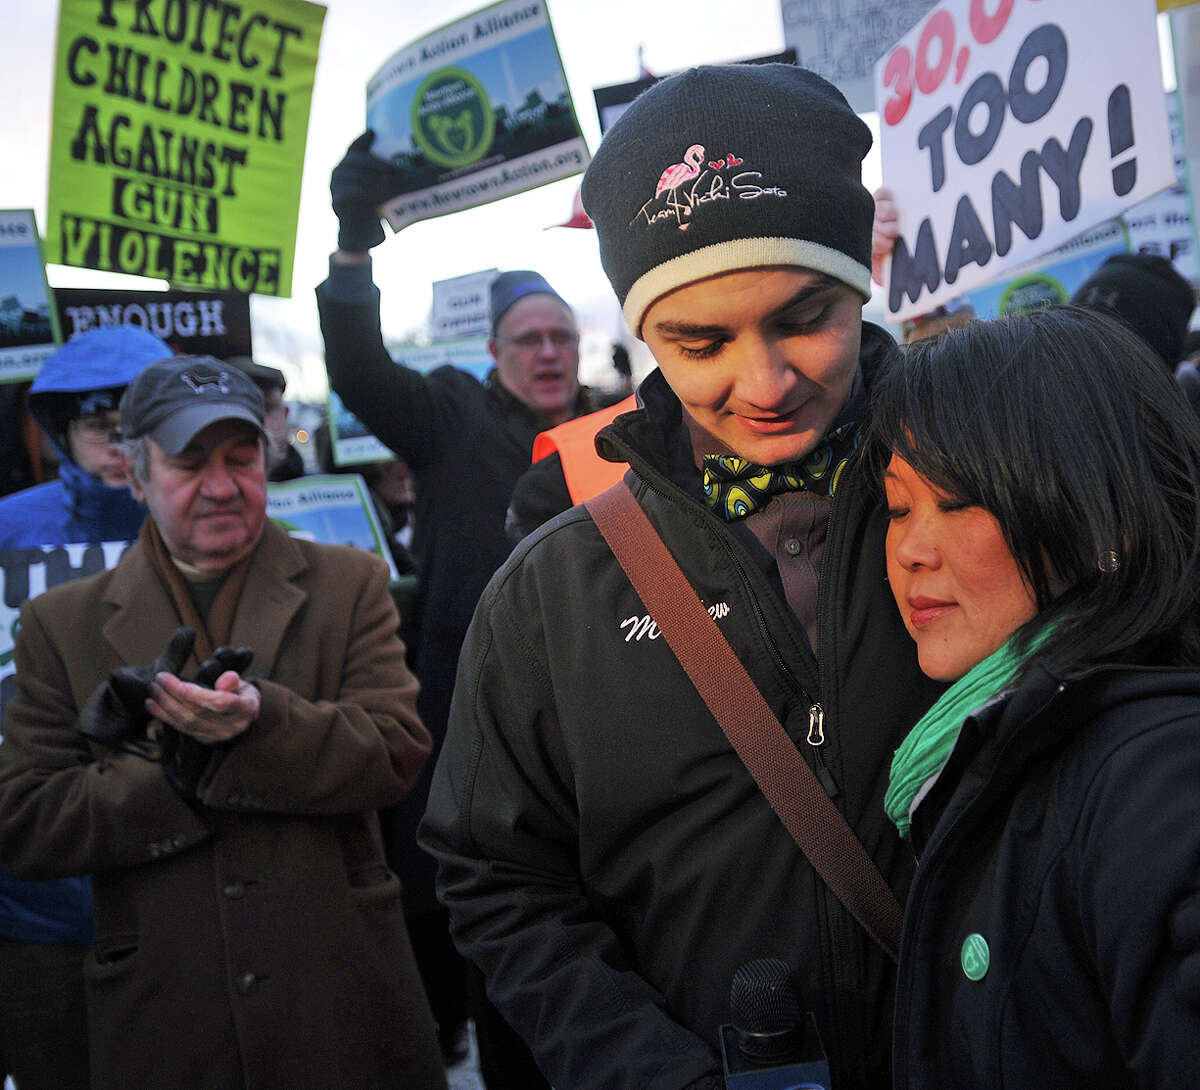 Matthew Soto, the brother of Sandy Hook massacre victim Victoria Soto, hugs Po Murray, chairwoman of Newtown Action Alliance, during a rally outside the National Shooting Sports Foundation's corporate headquarters in Newtown.